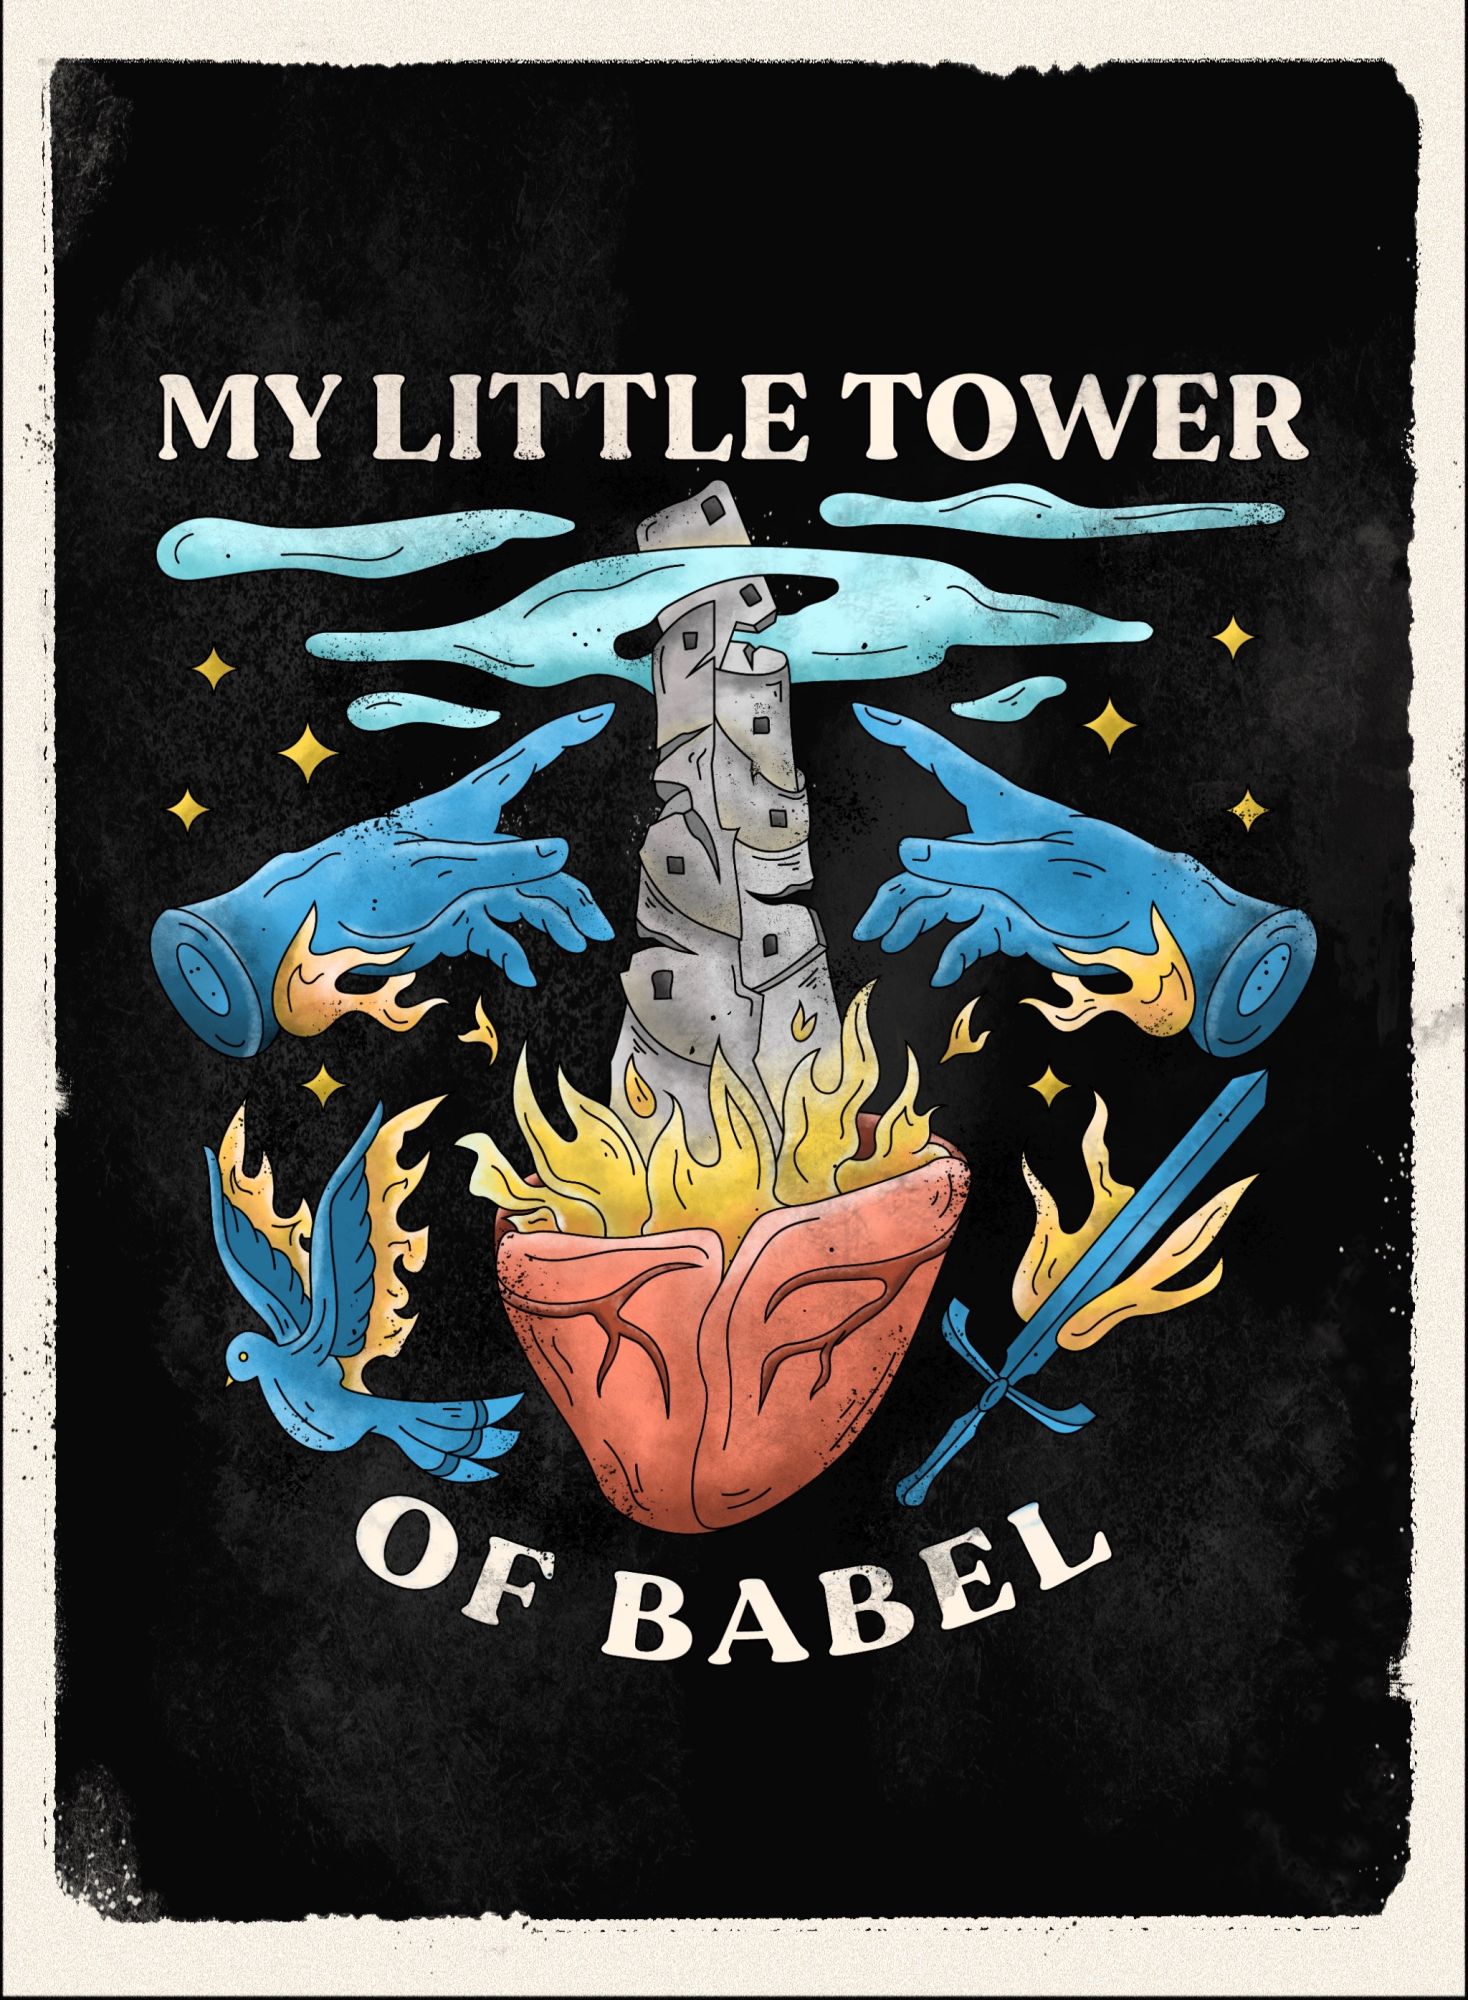 My Little Tower of Babel